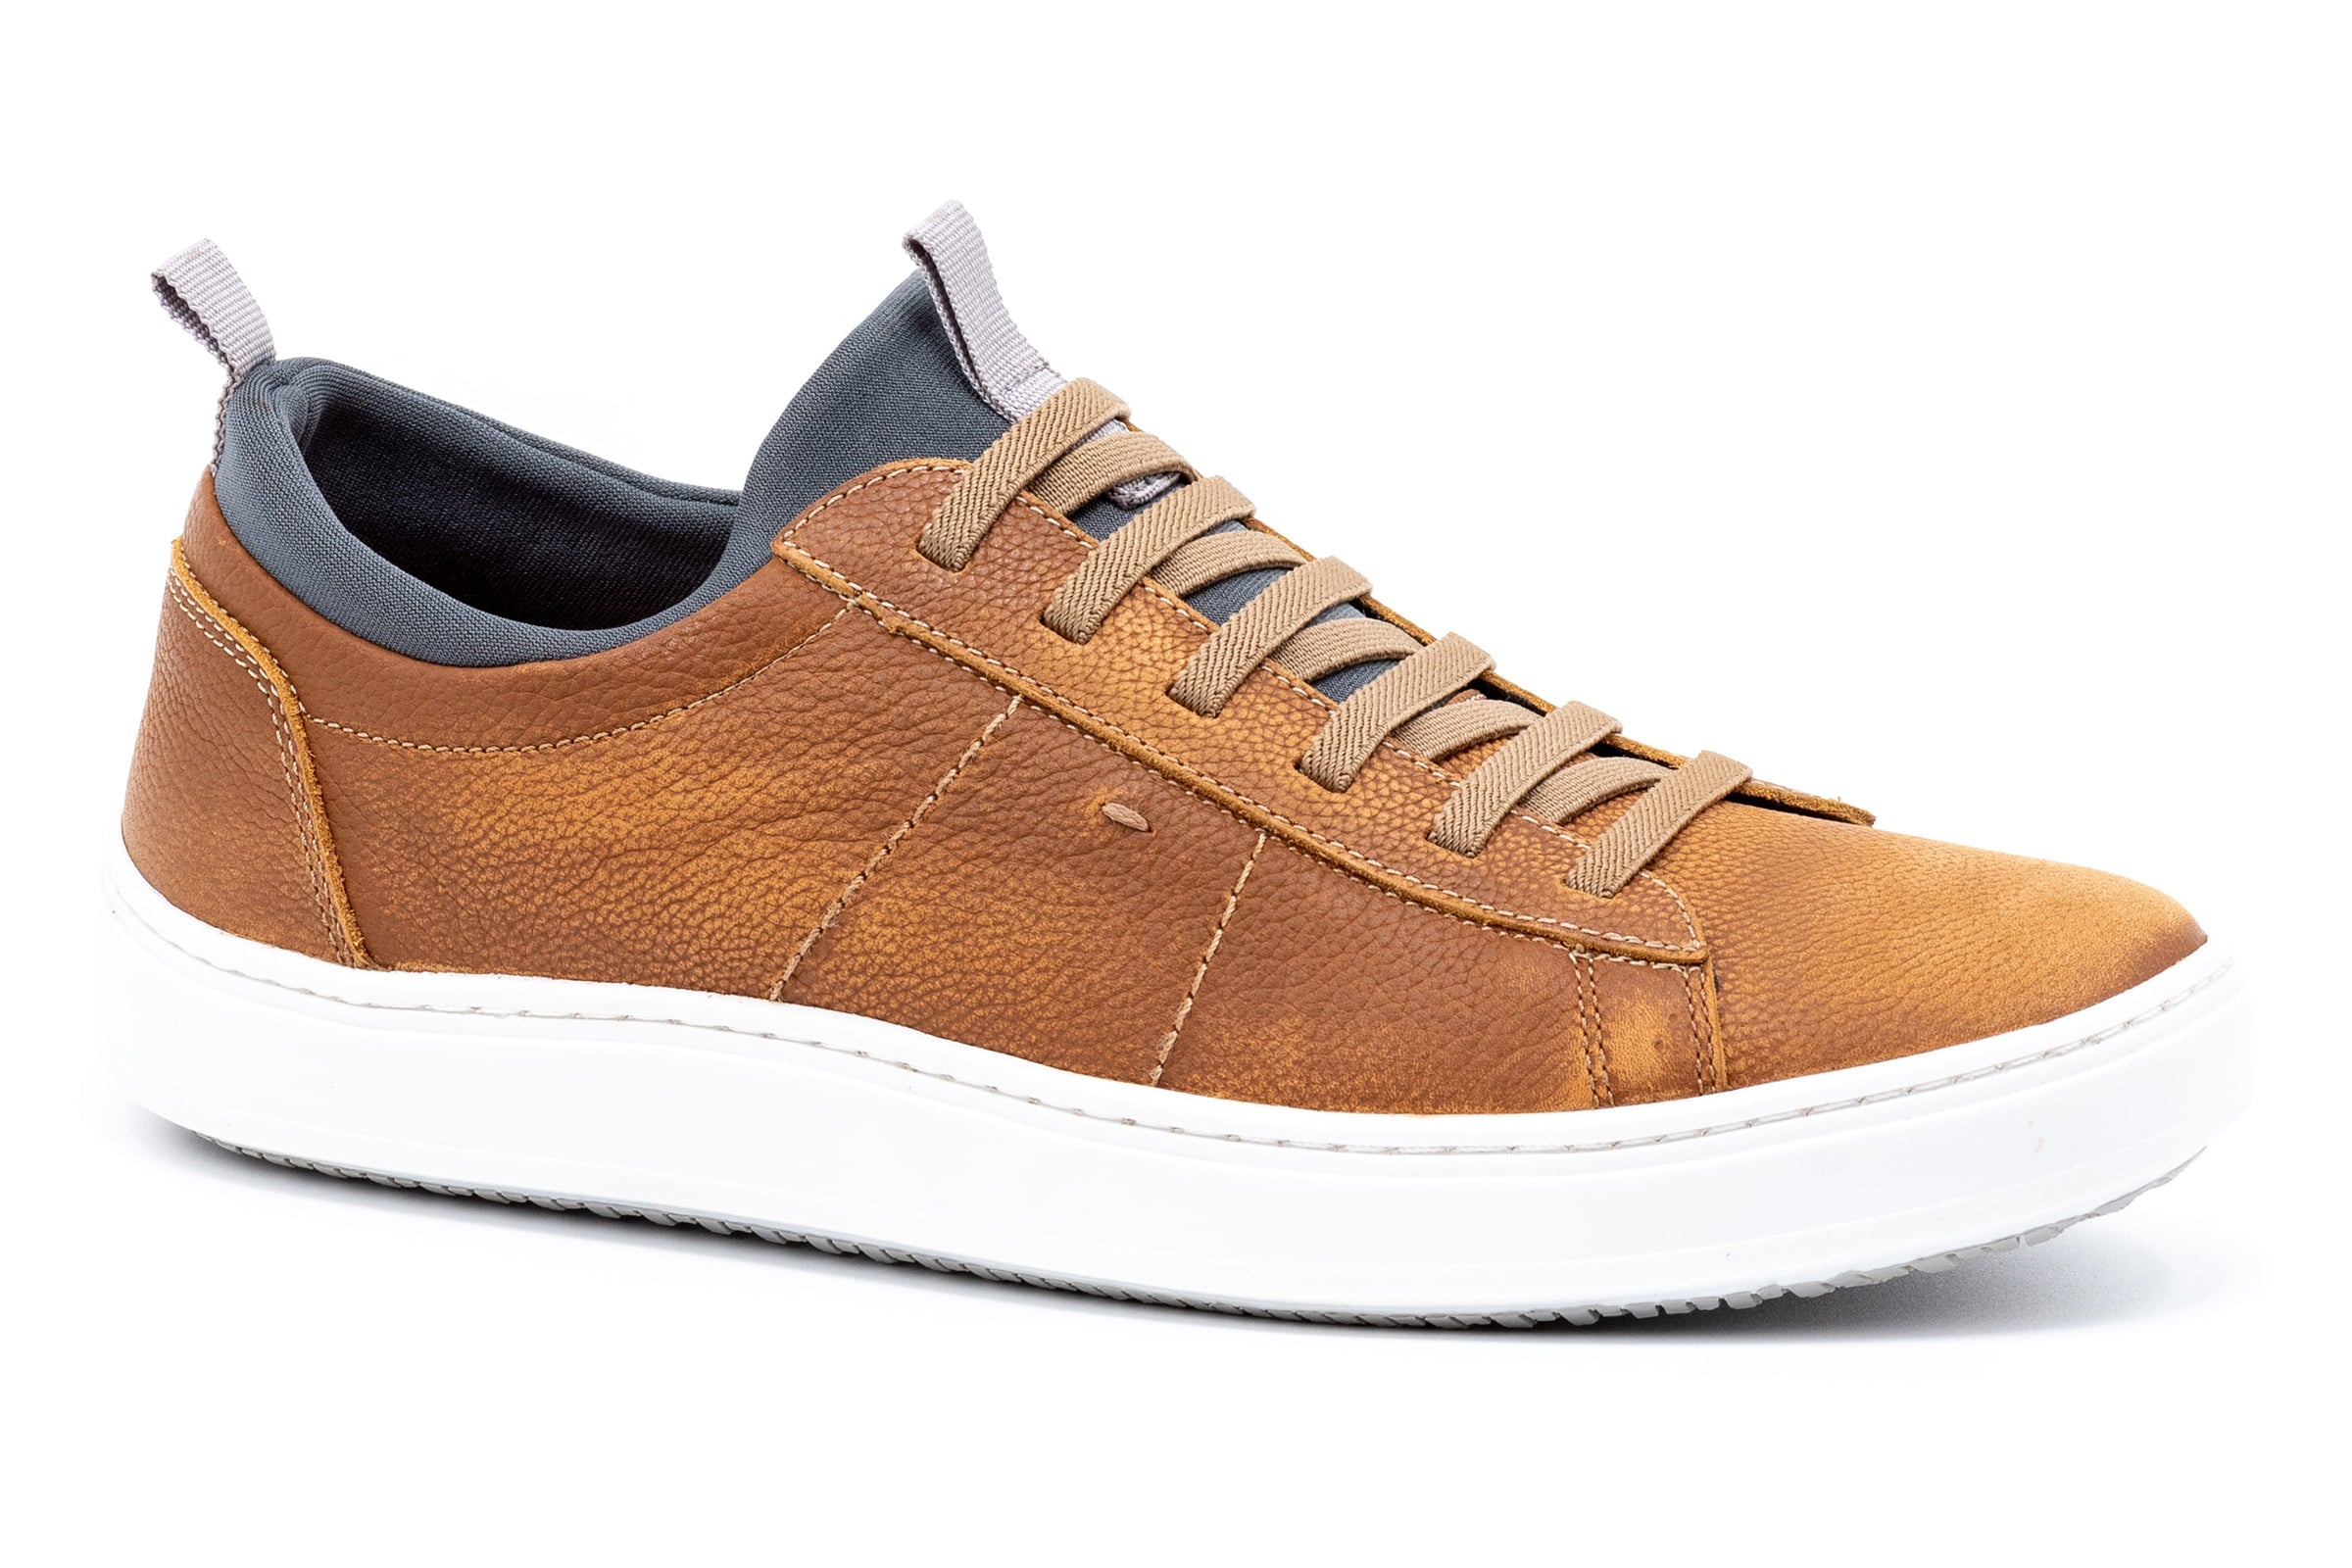 Cameron Sneaker - Old Saddle Leather